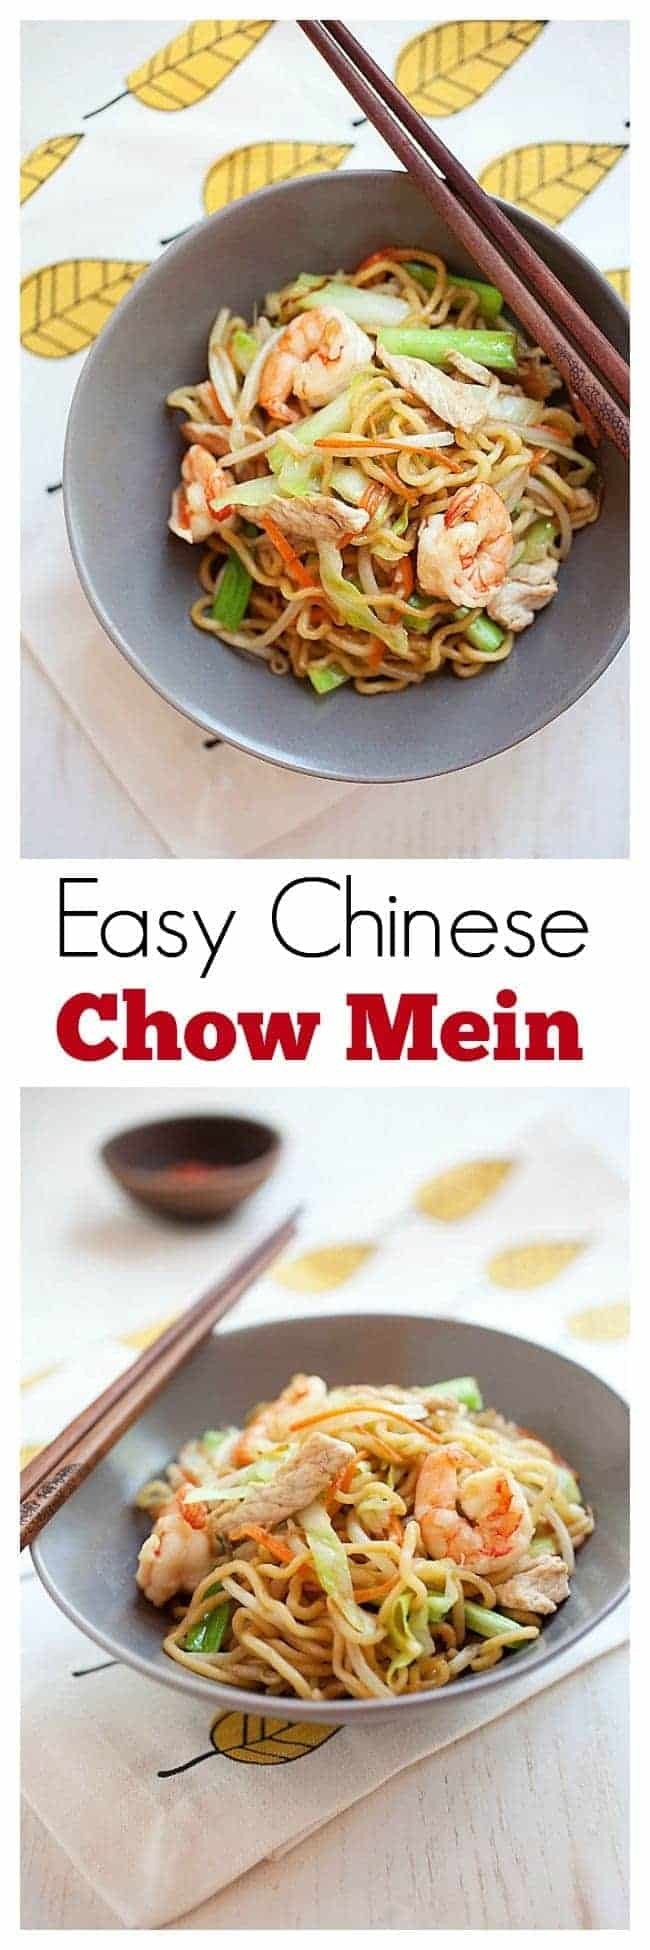 Easy Healthy Asian Recipes
 Chow Mein Chinese Noodles